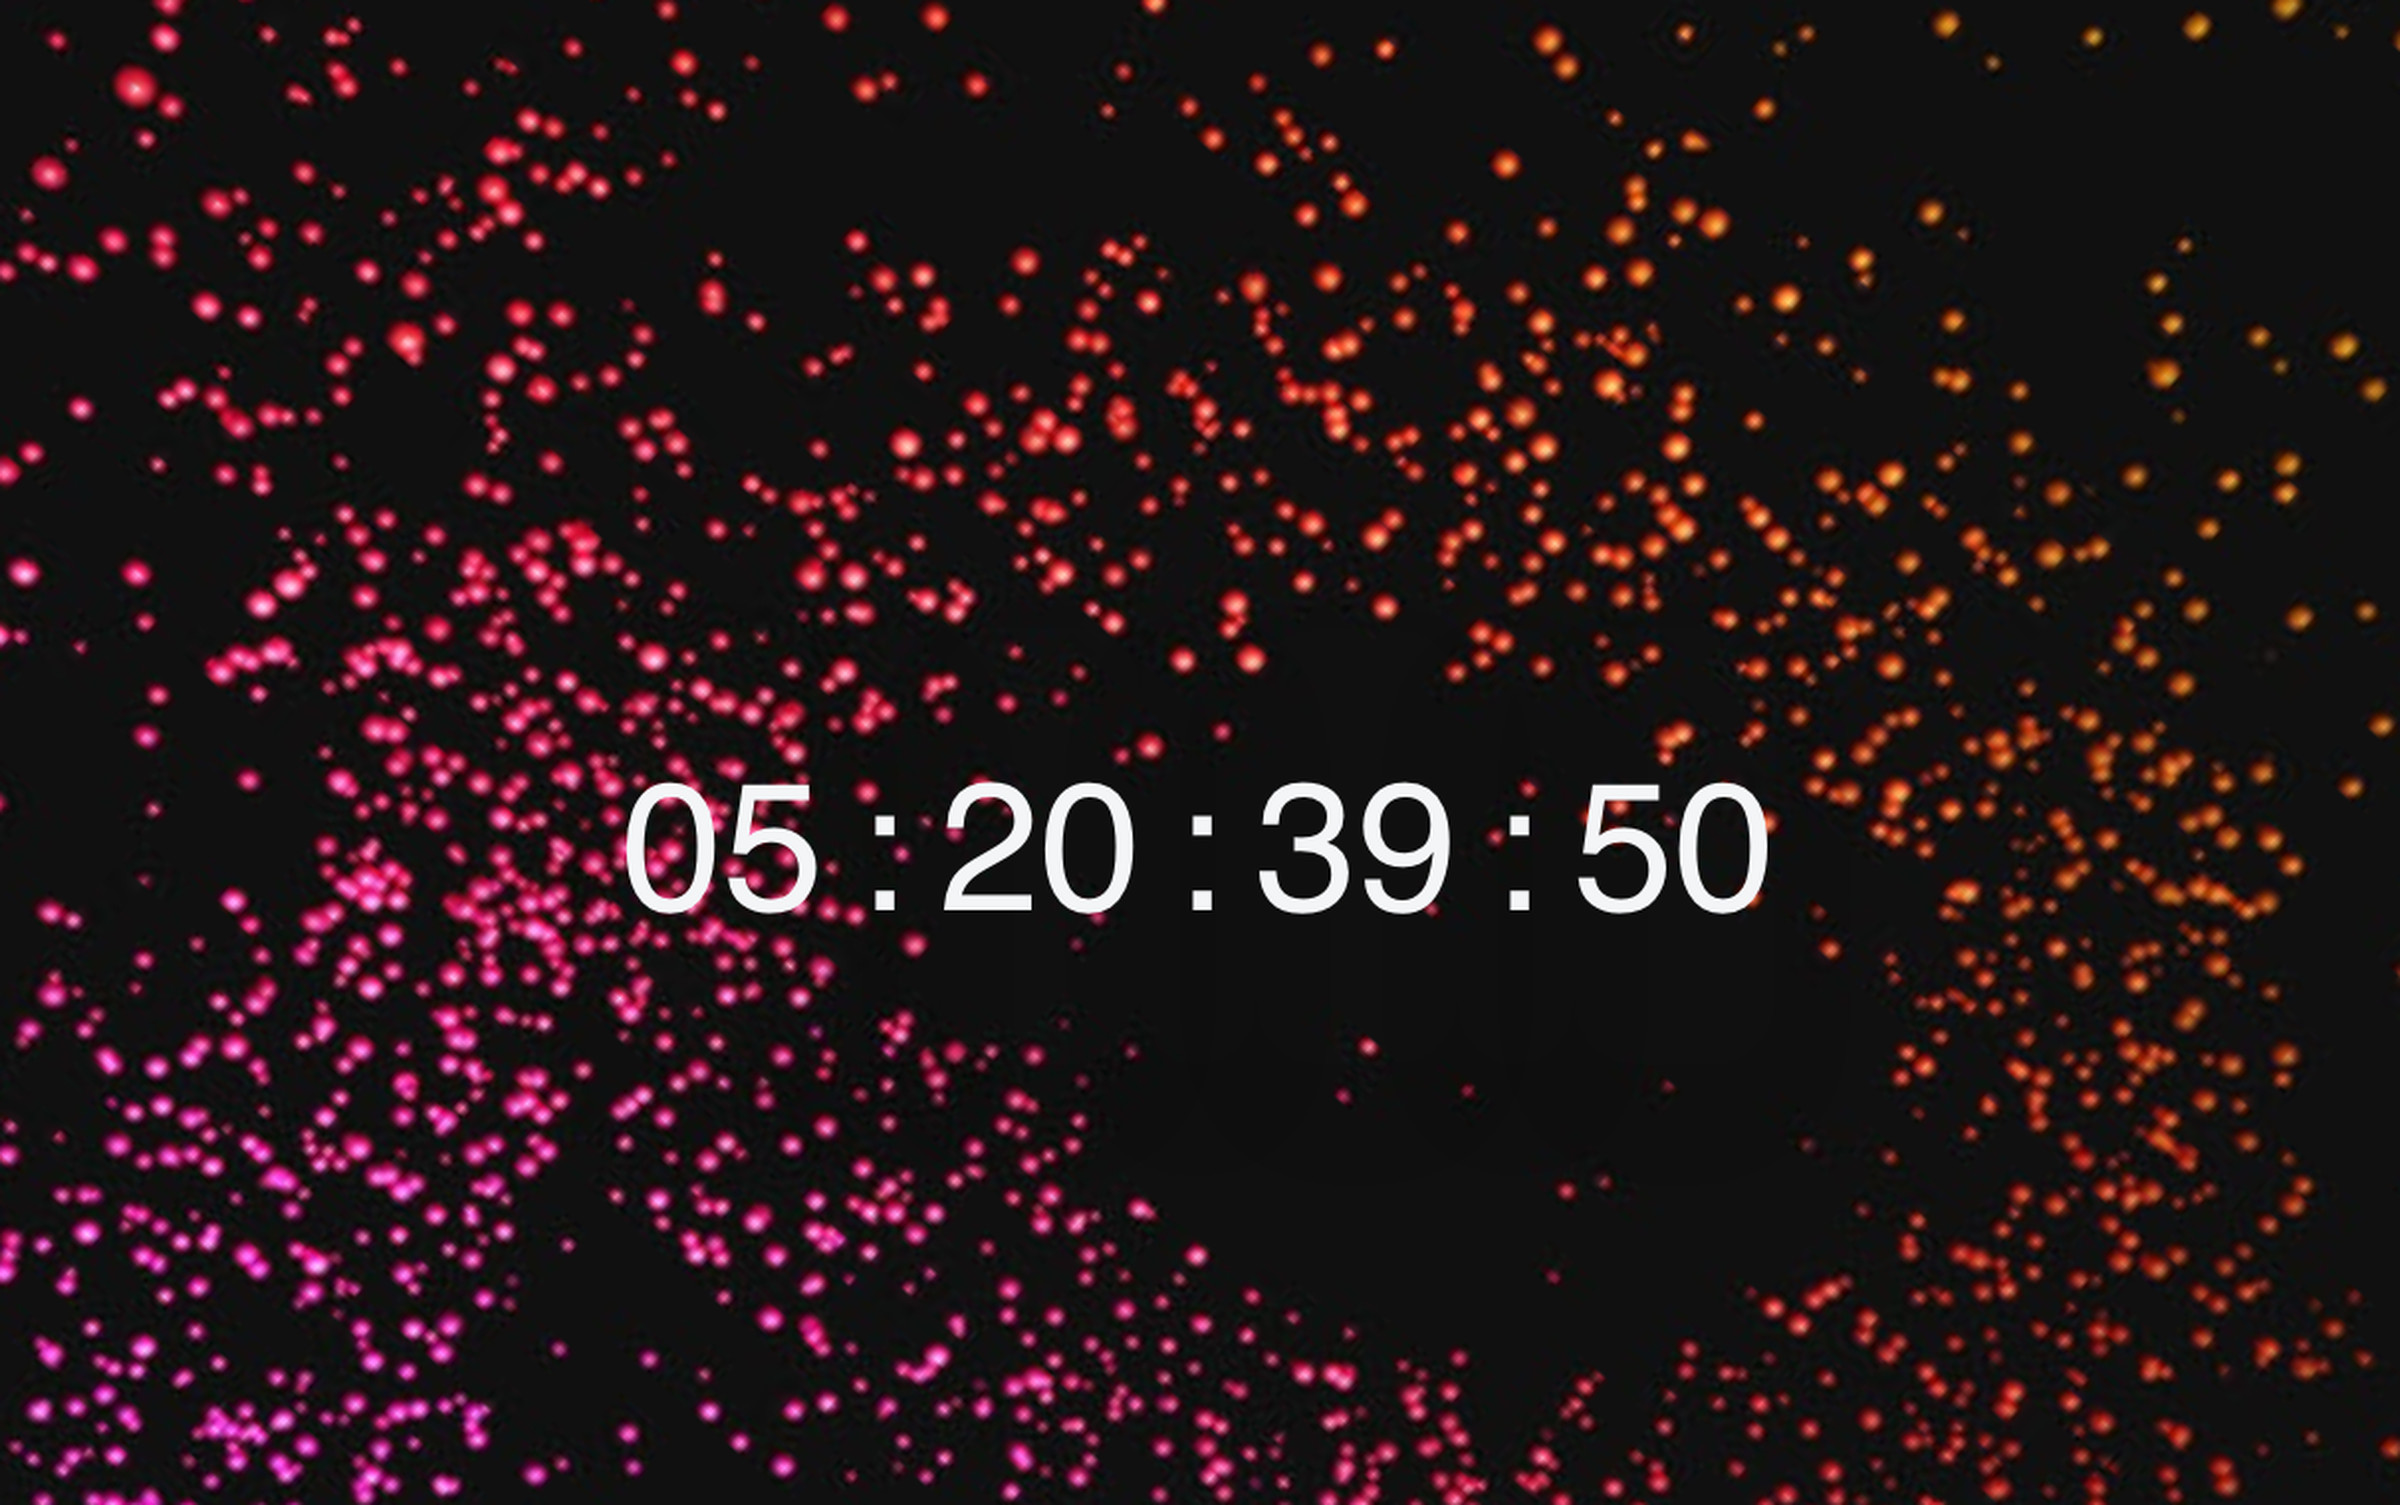 A countdown timer with five days and twenty hours remaining. Pink and orange confetti is falling in the background.